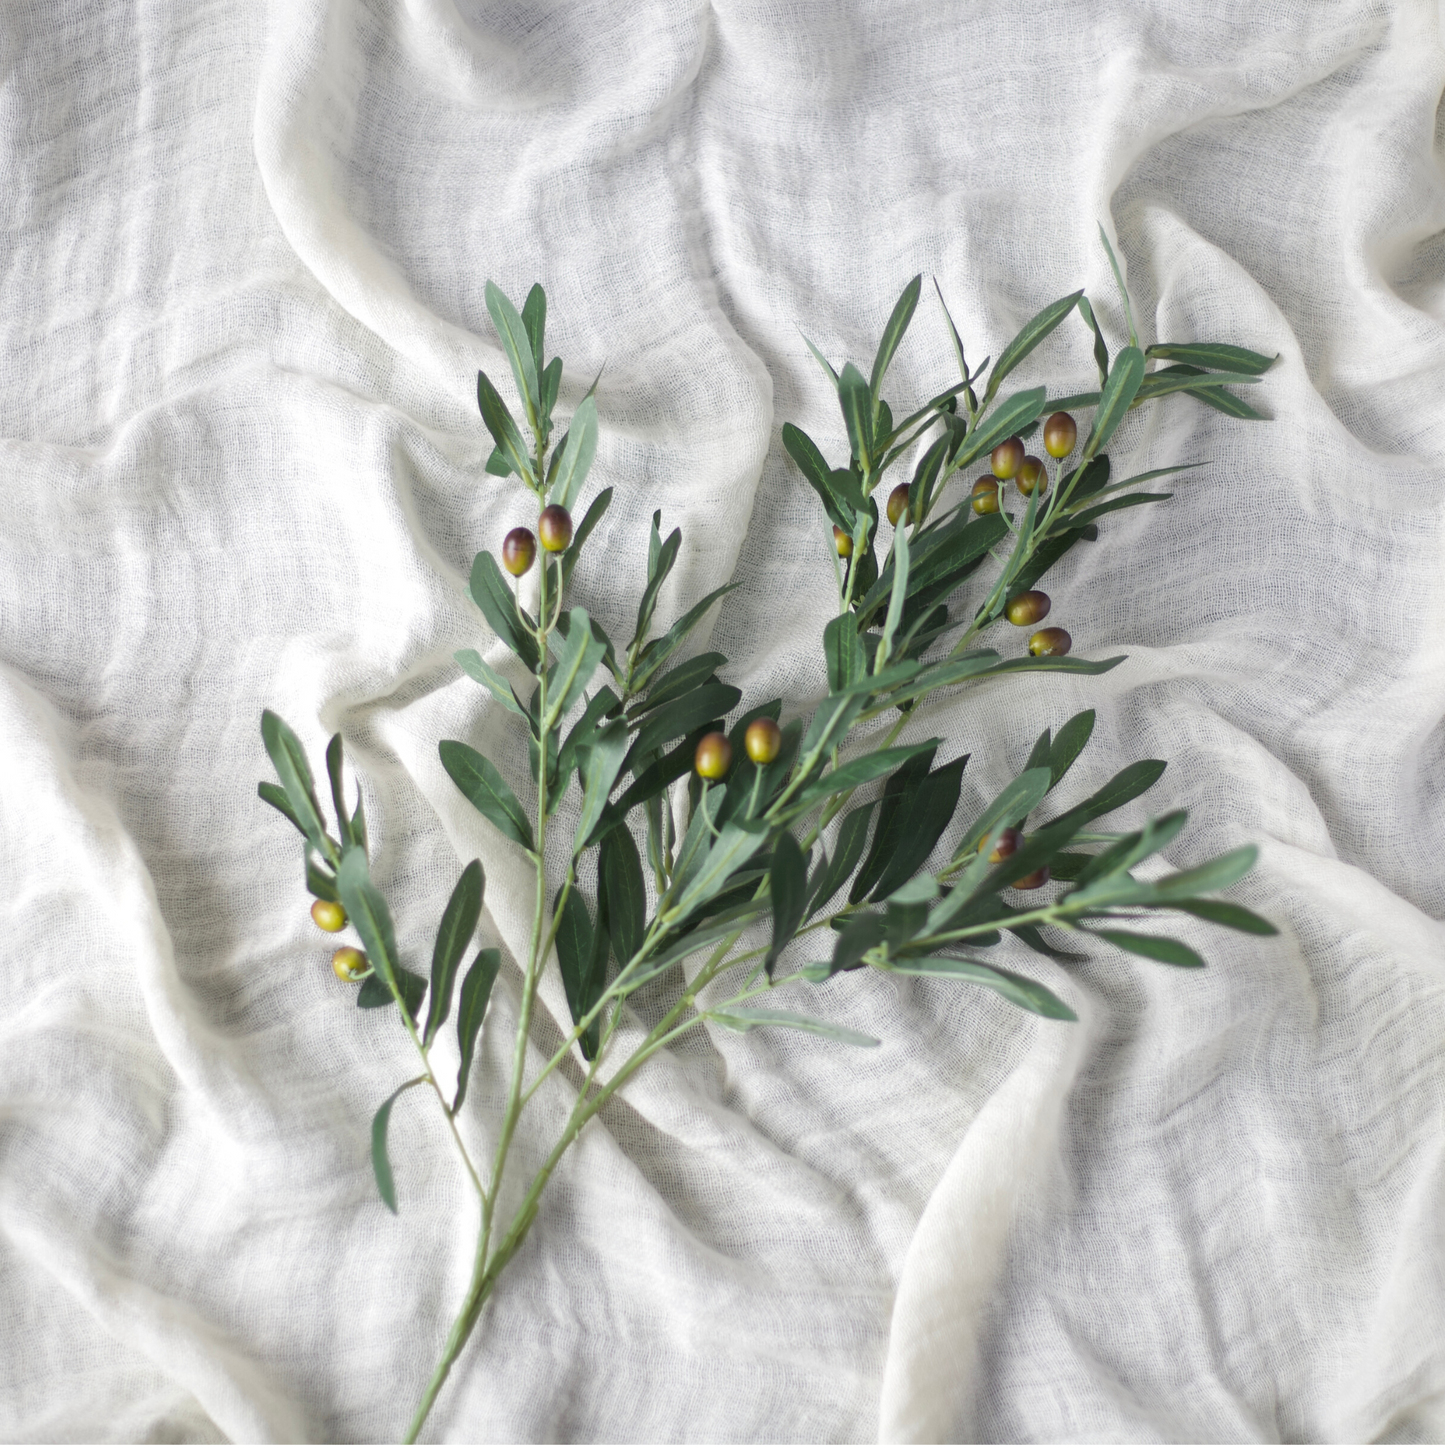 Green Olive Branch with Olives